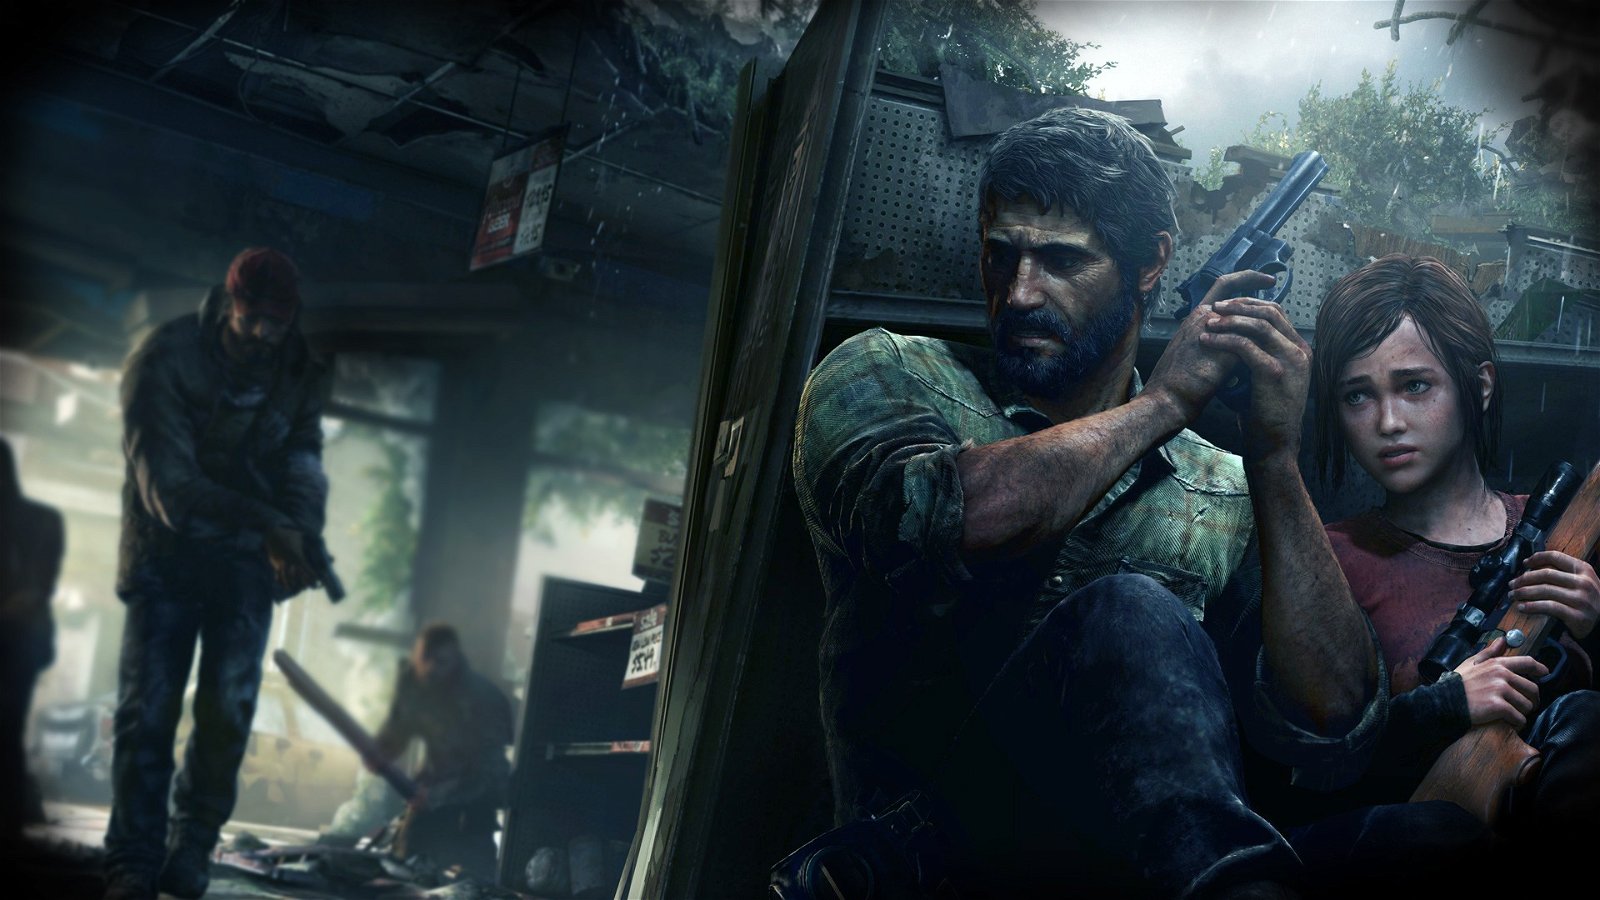 Naughty Dog Reveals New Last of Us Poster as Part of Outbreak Day 1